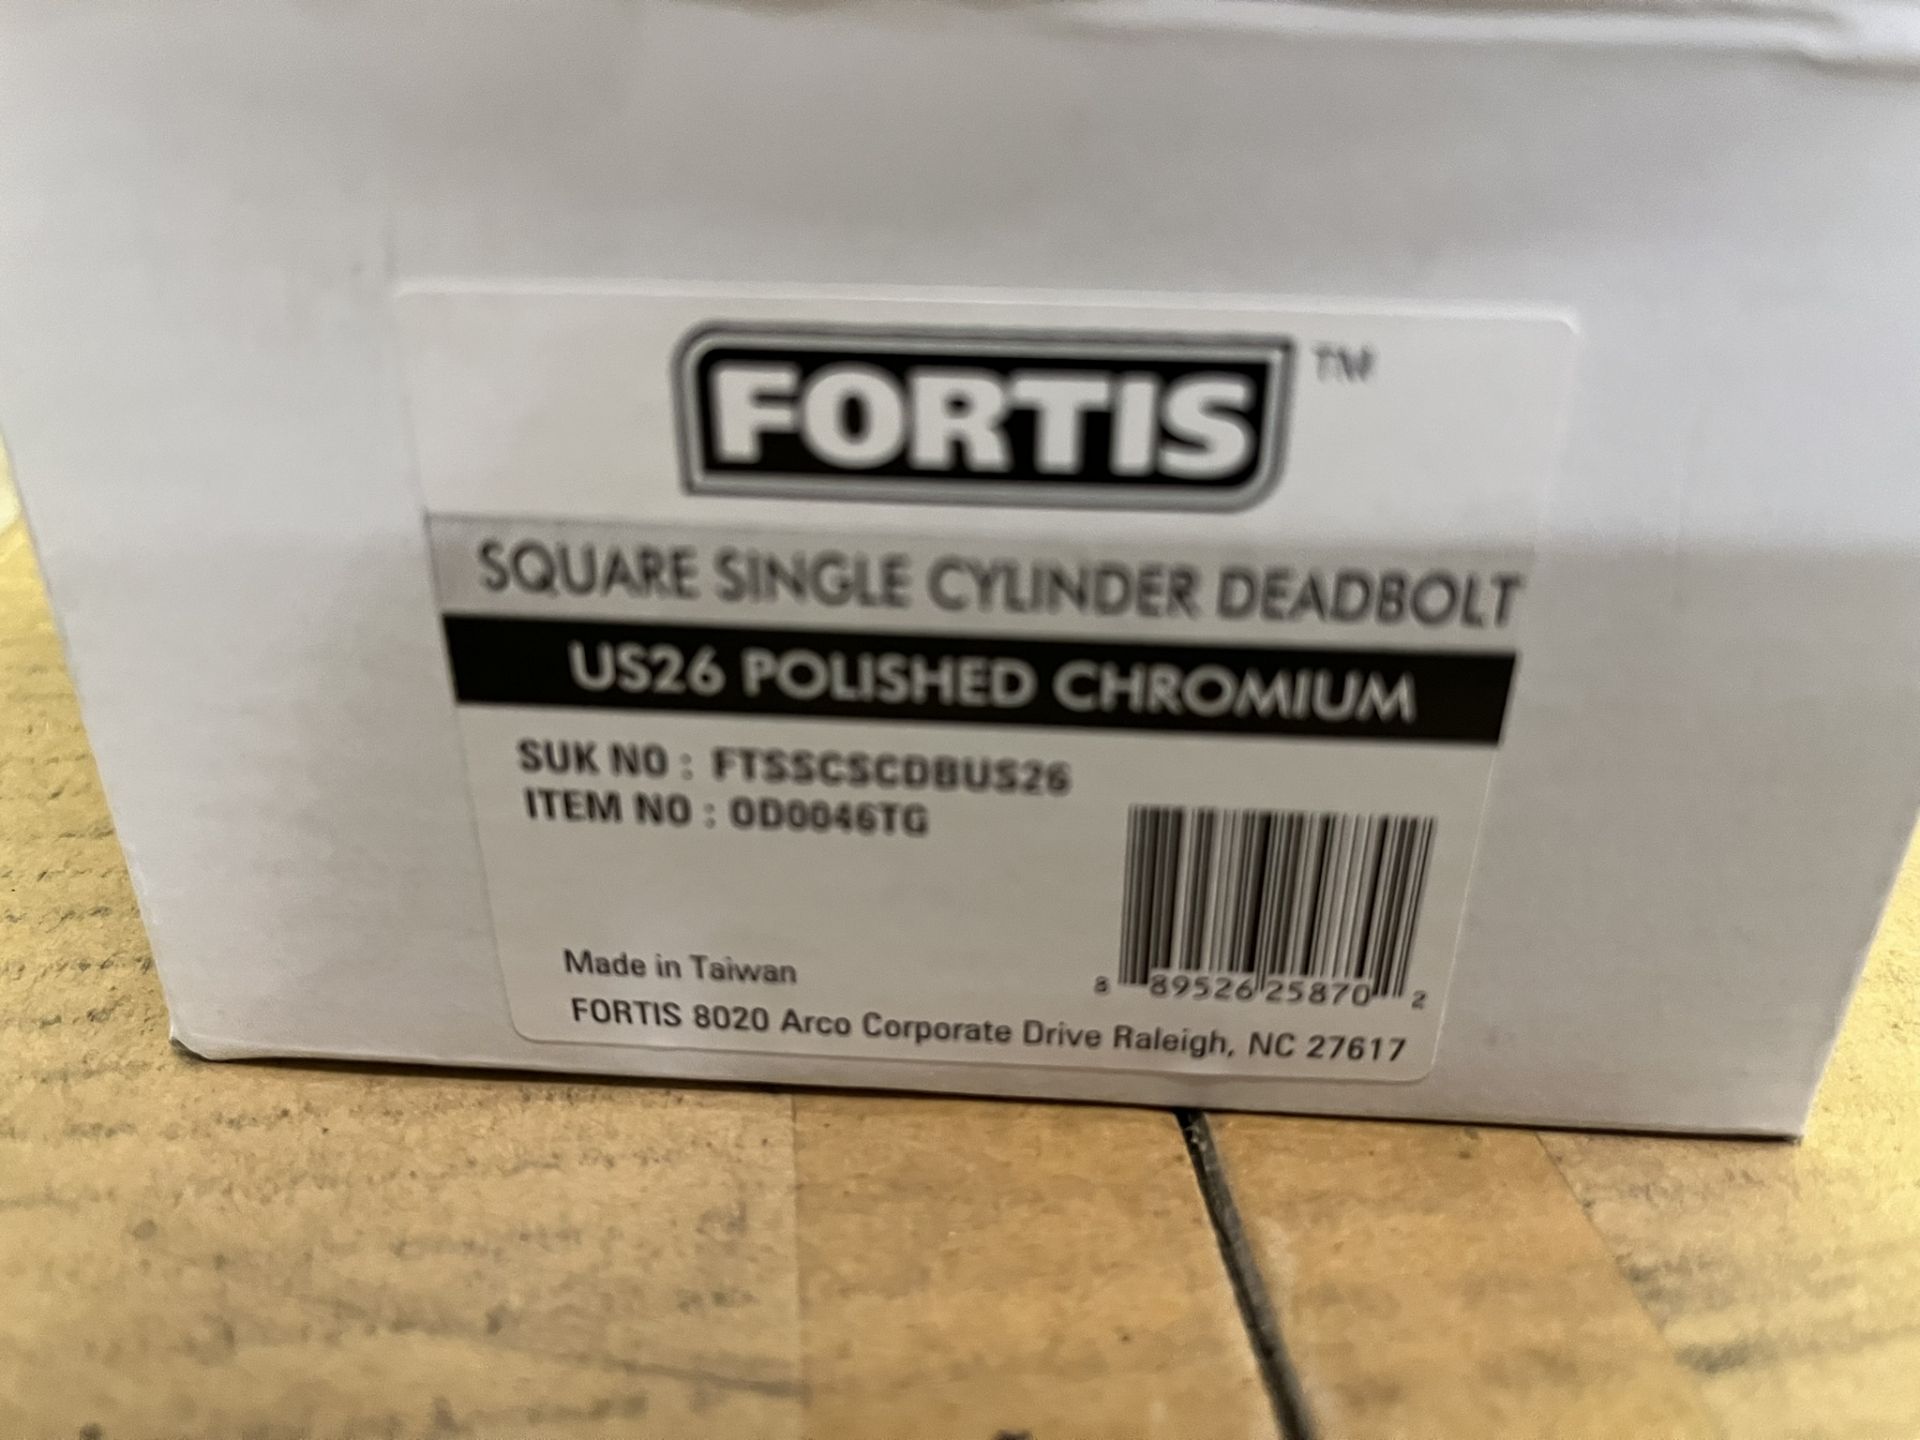 (12) FORTIS SQUARE SINGLE CYLINDER DEADBOLTS US26 POLISHED CHROMIUM - Image 2 of 3